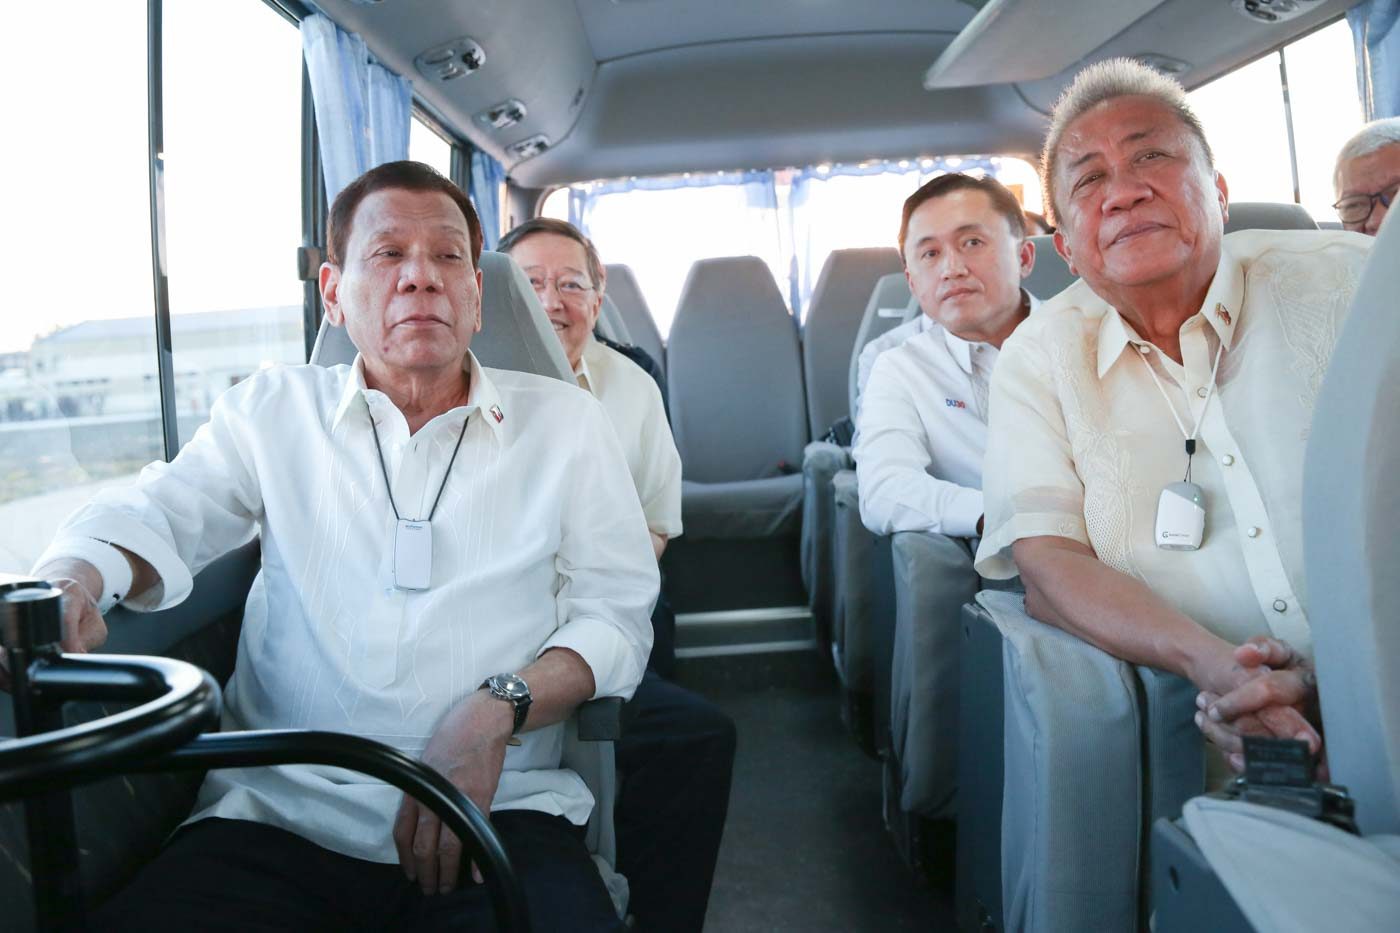 To ‘cushion’ effects of virus outbreak, DOT wants Duterte to visit tourist spots